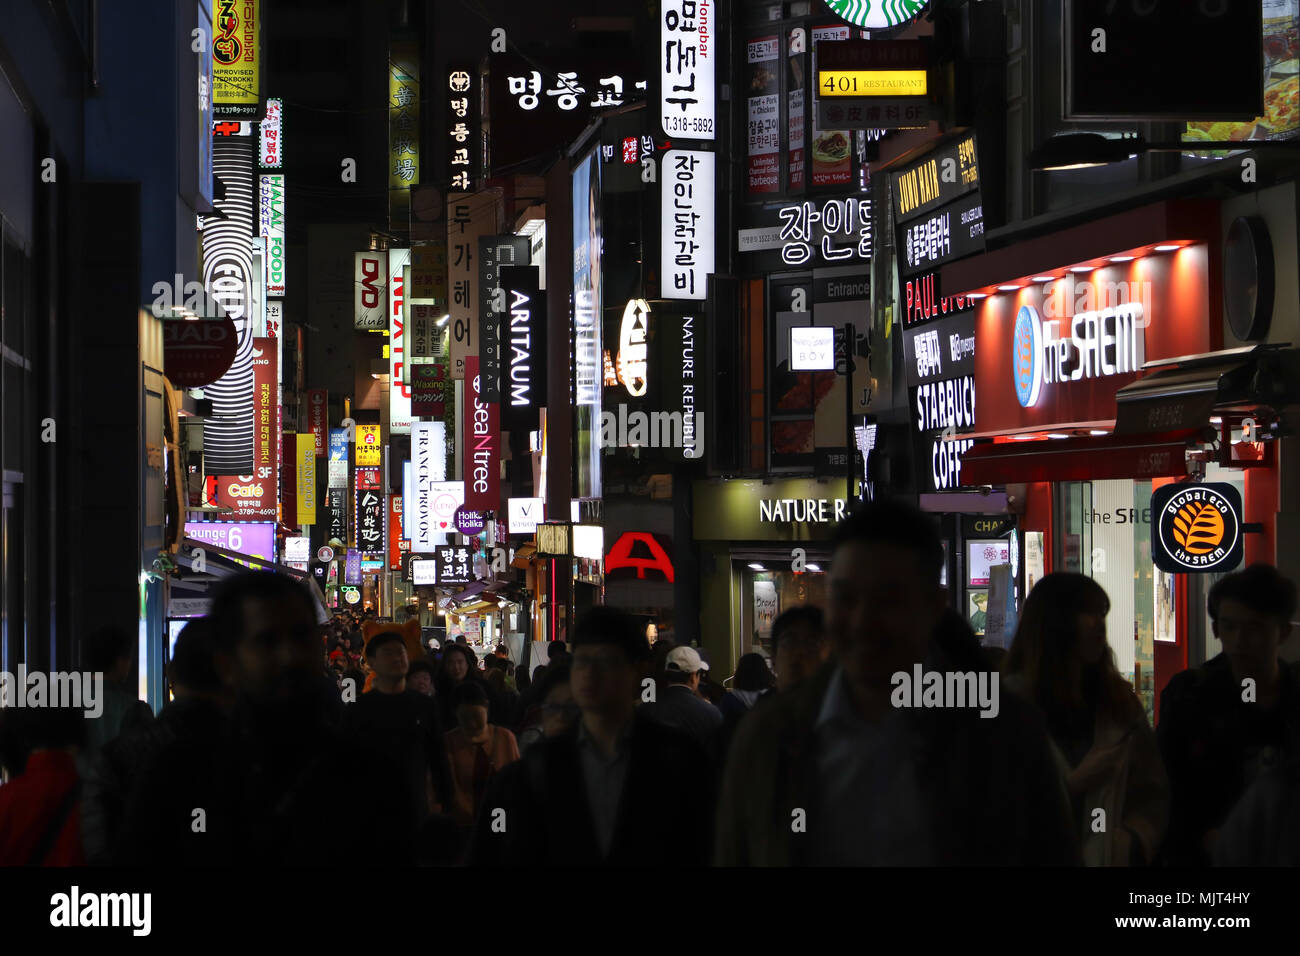 People flock to the bustling Myeongdong area of Seoul, South Korea, in the evening to shop, sample street food, check fashions, trends. Dense crowds. Stock Photo